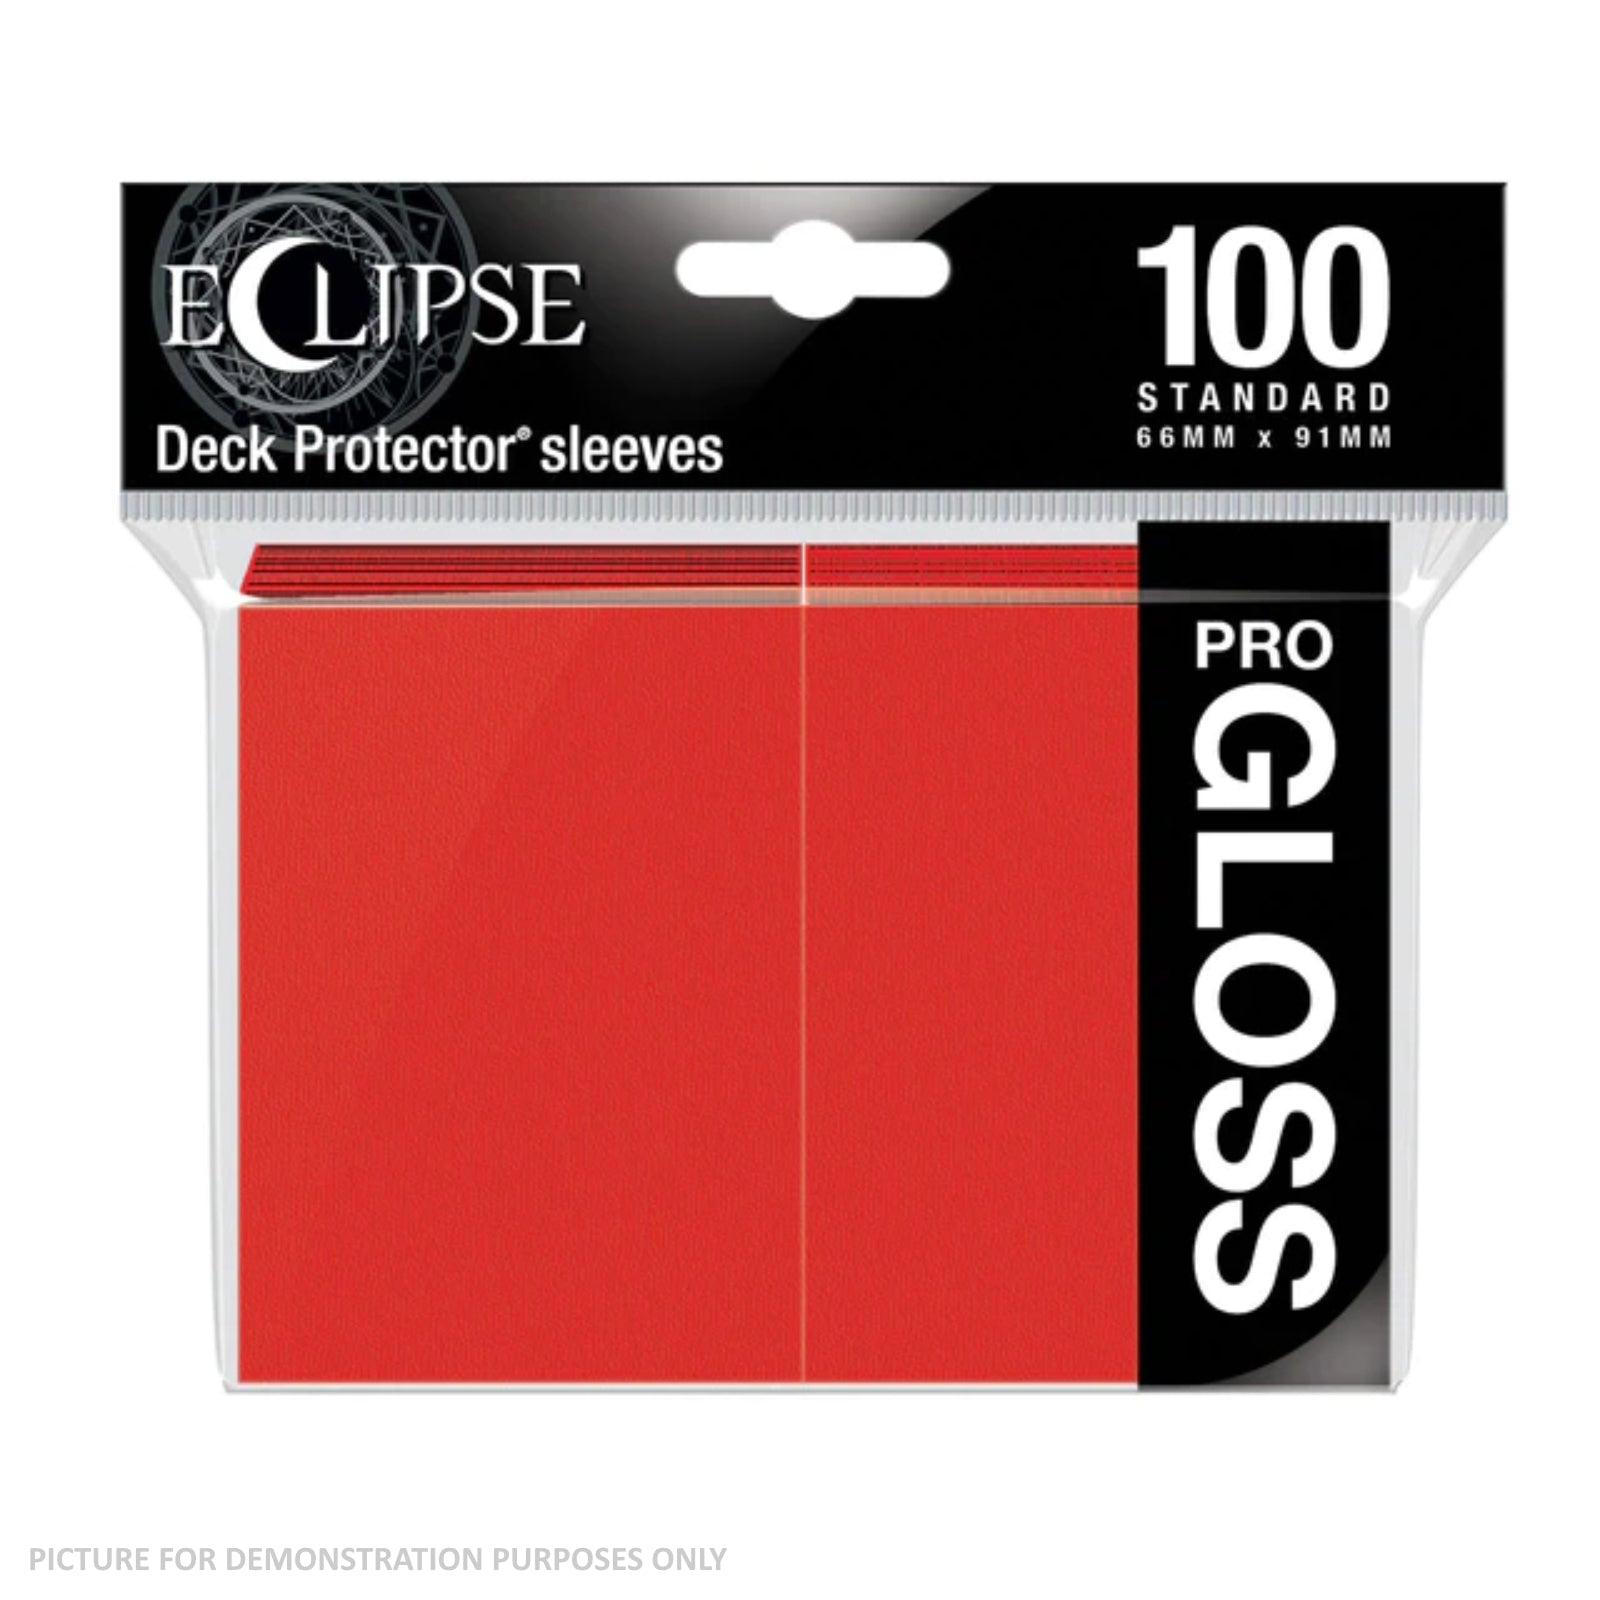 Ultra Pro Eclipse Gloss Standard Deck Protector Sleeves 100ct - Red